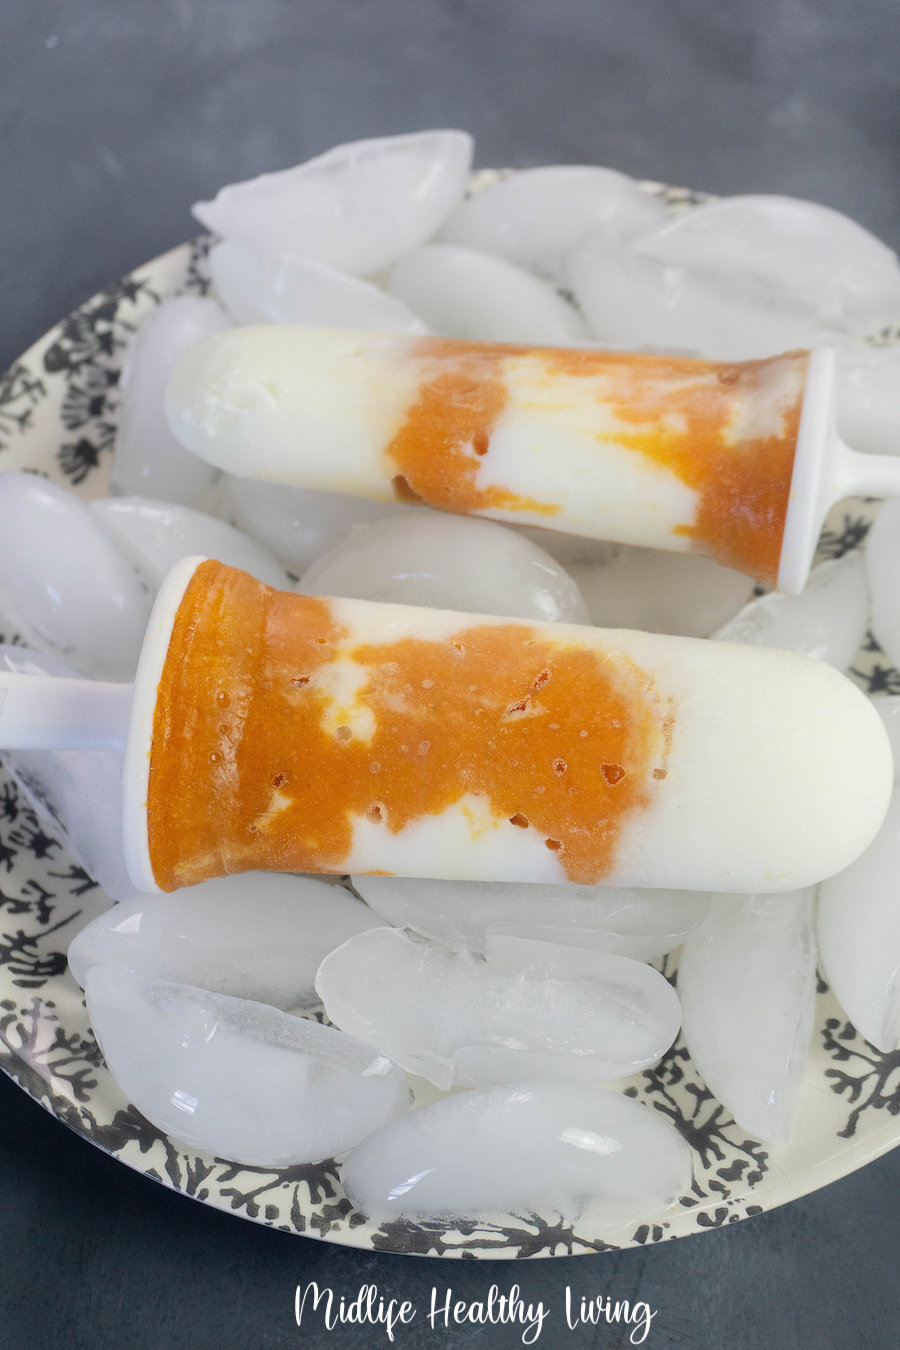 Here we see the finished pumpkin popsicles. 